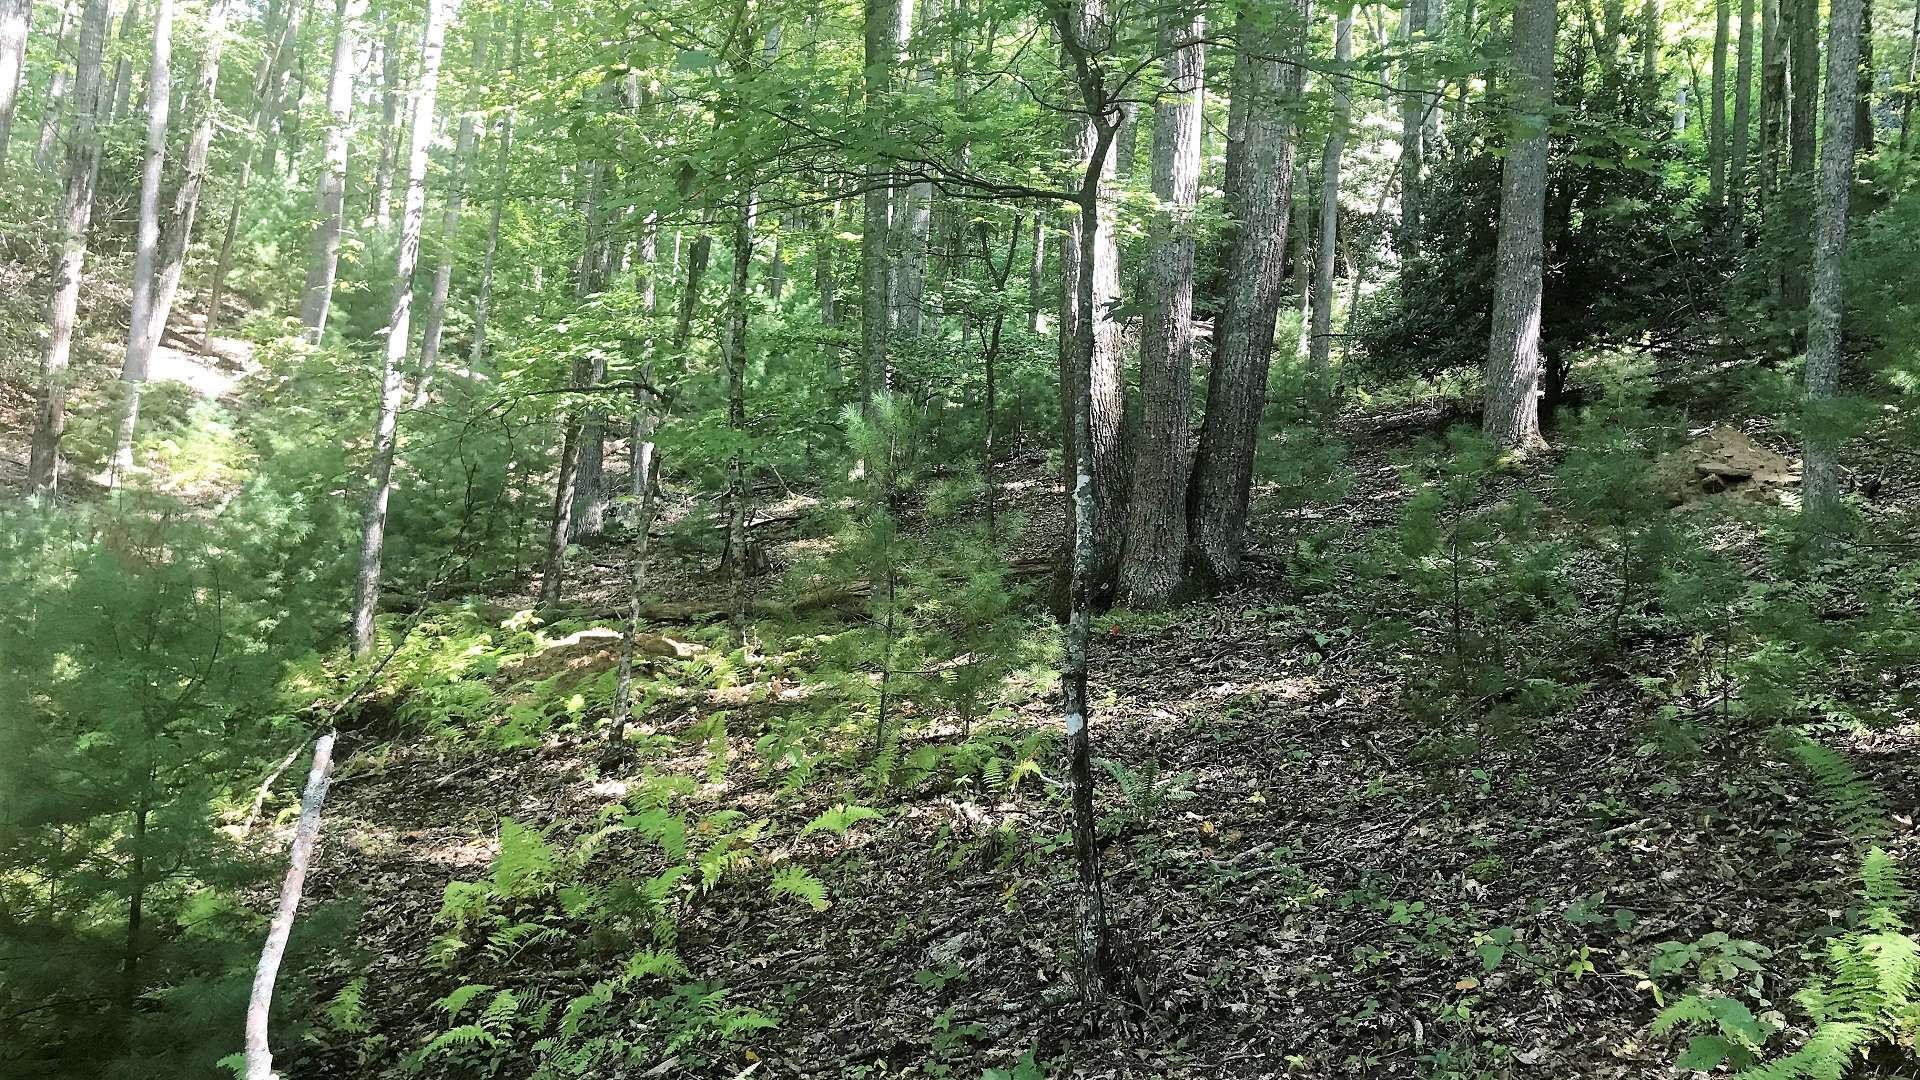 The lot lays well and offers a mixture of hardwoods, evergreens and native mountain foliage.  A 3-bedroom septic system in place.